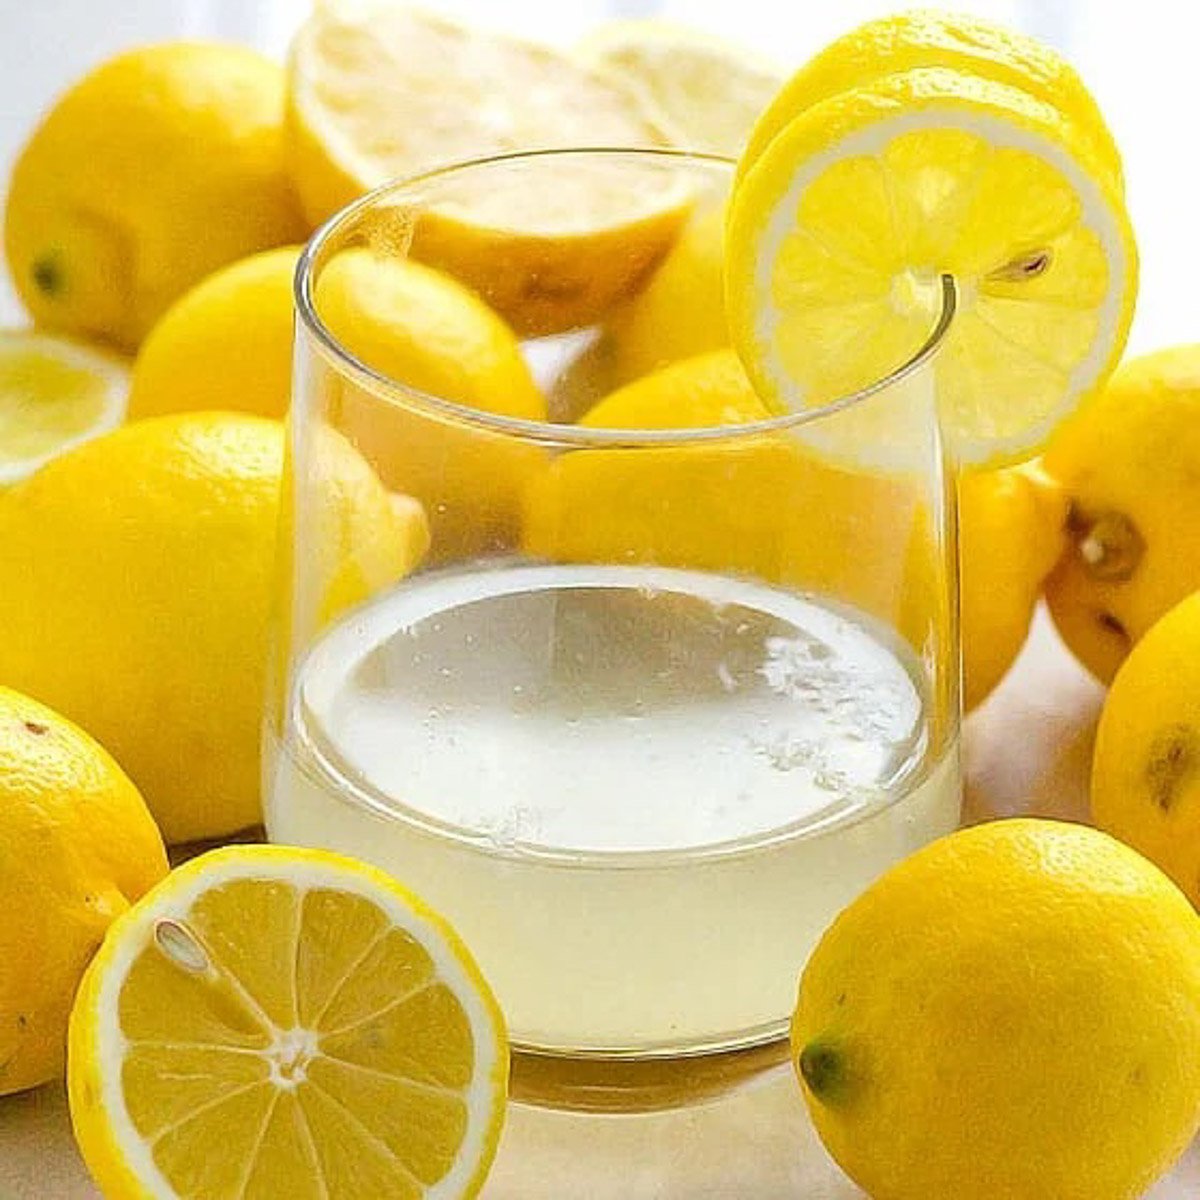 How to Make Lemon Water (Video) (VIDEO